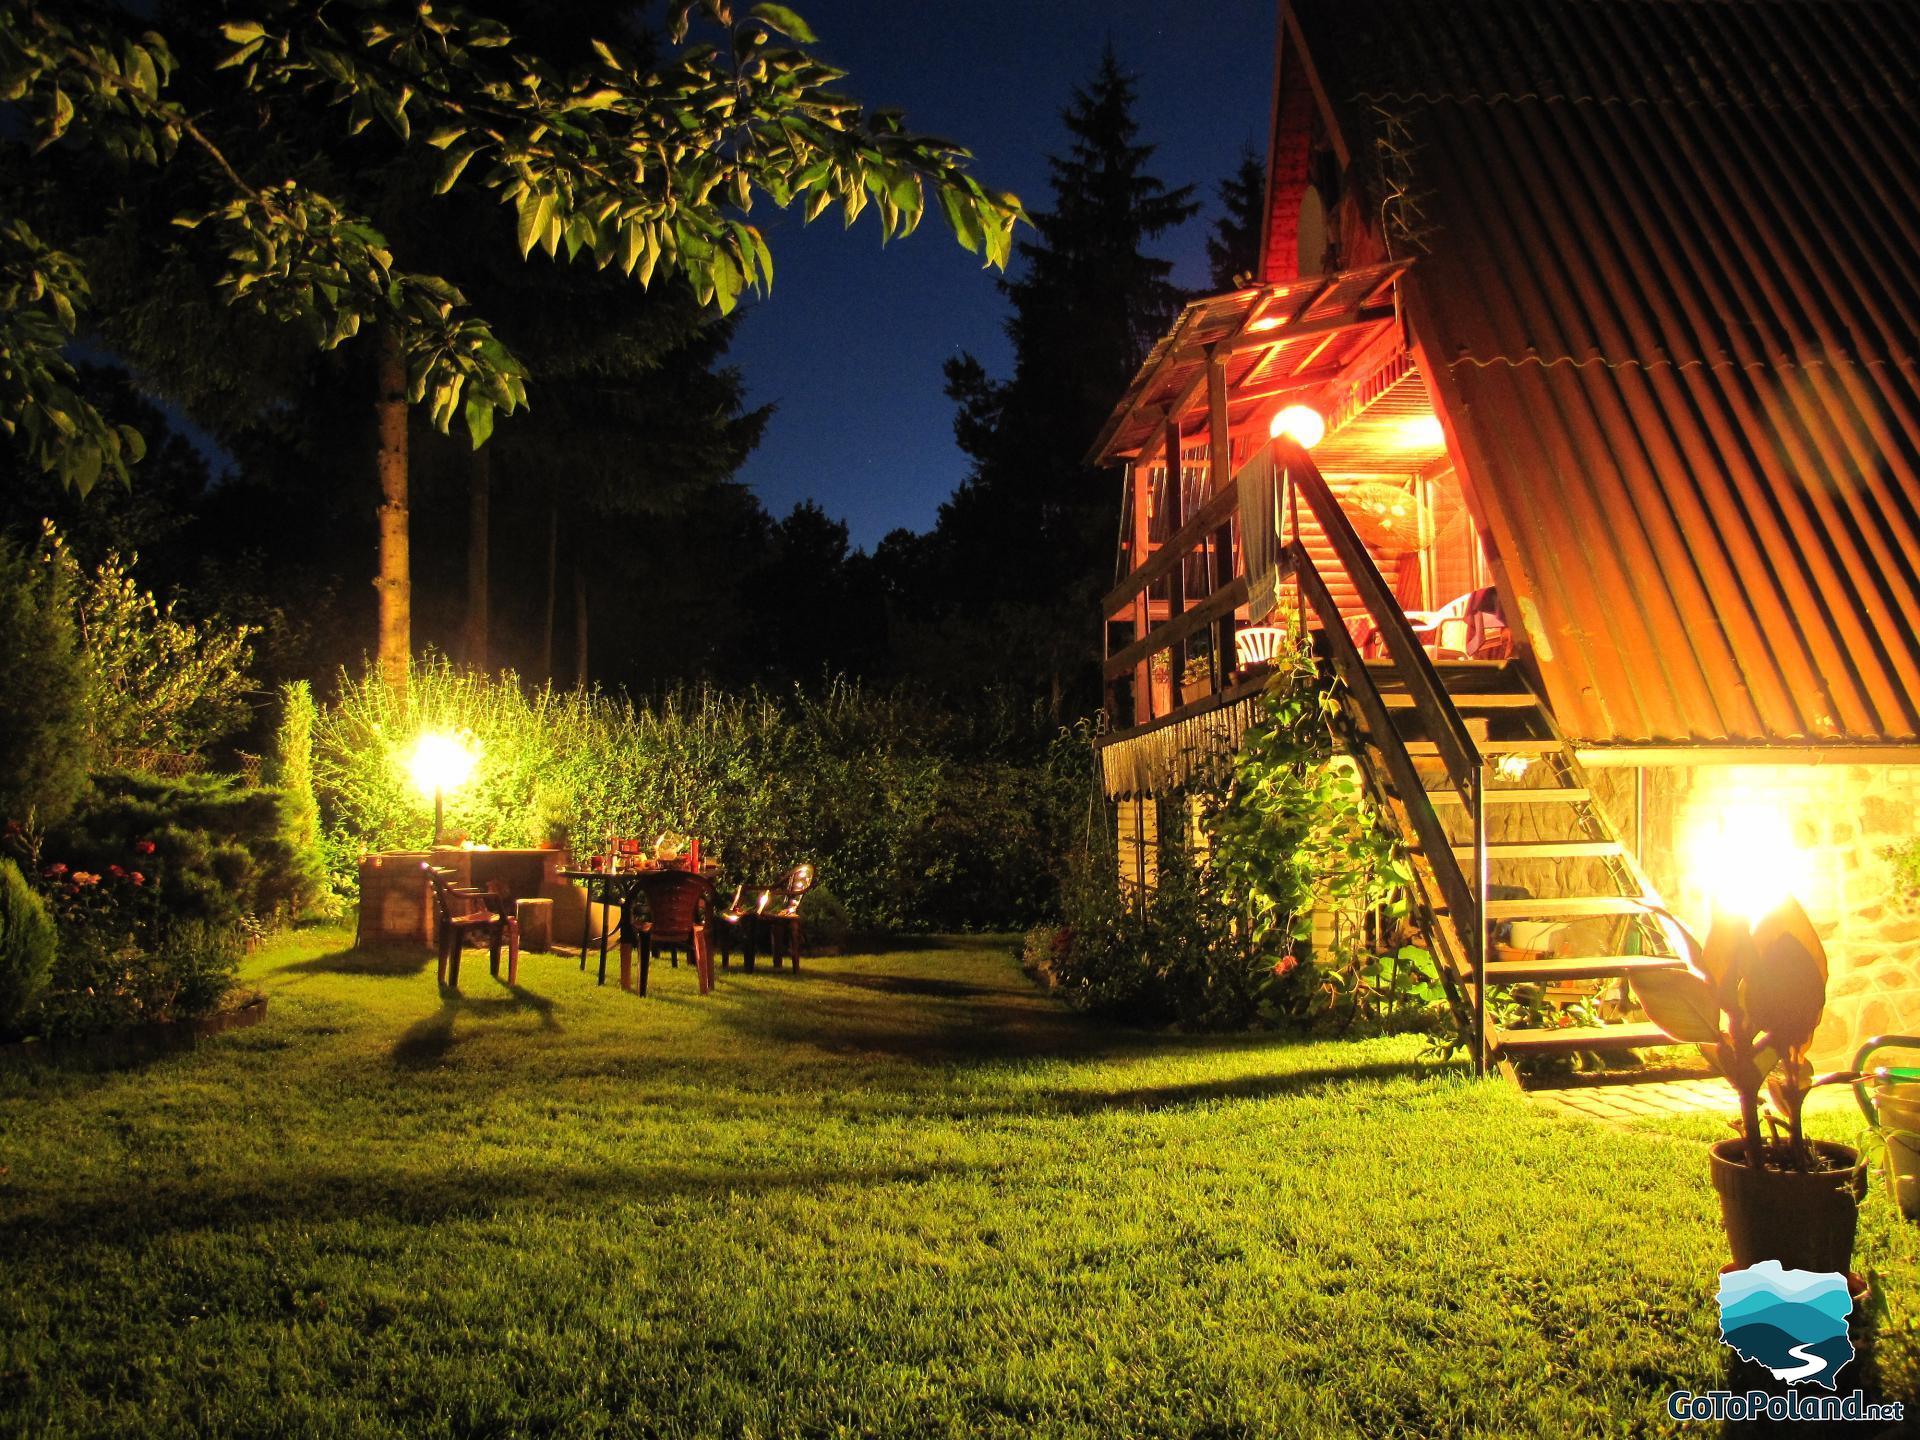 A summer house at night illuminated by several portable lamps